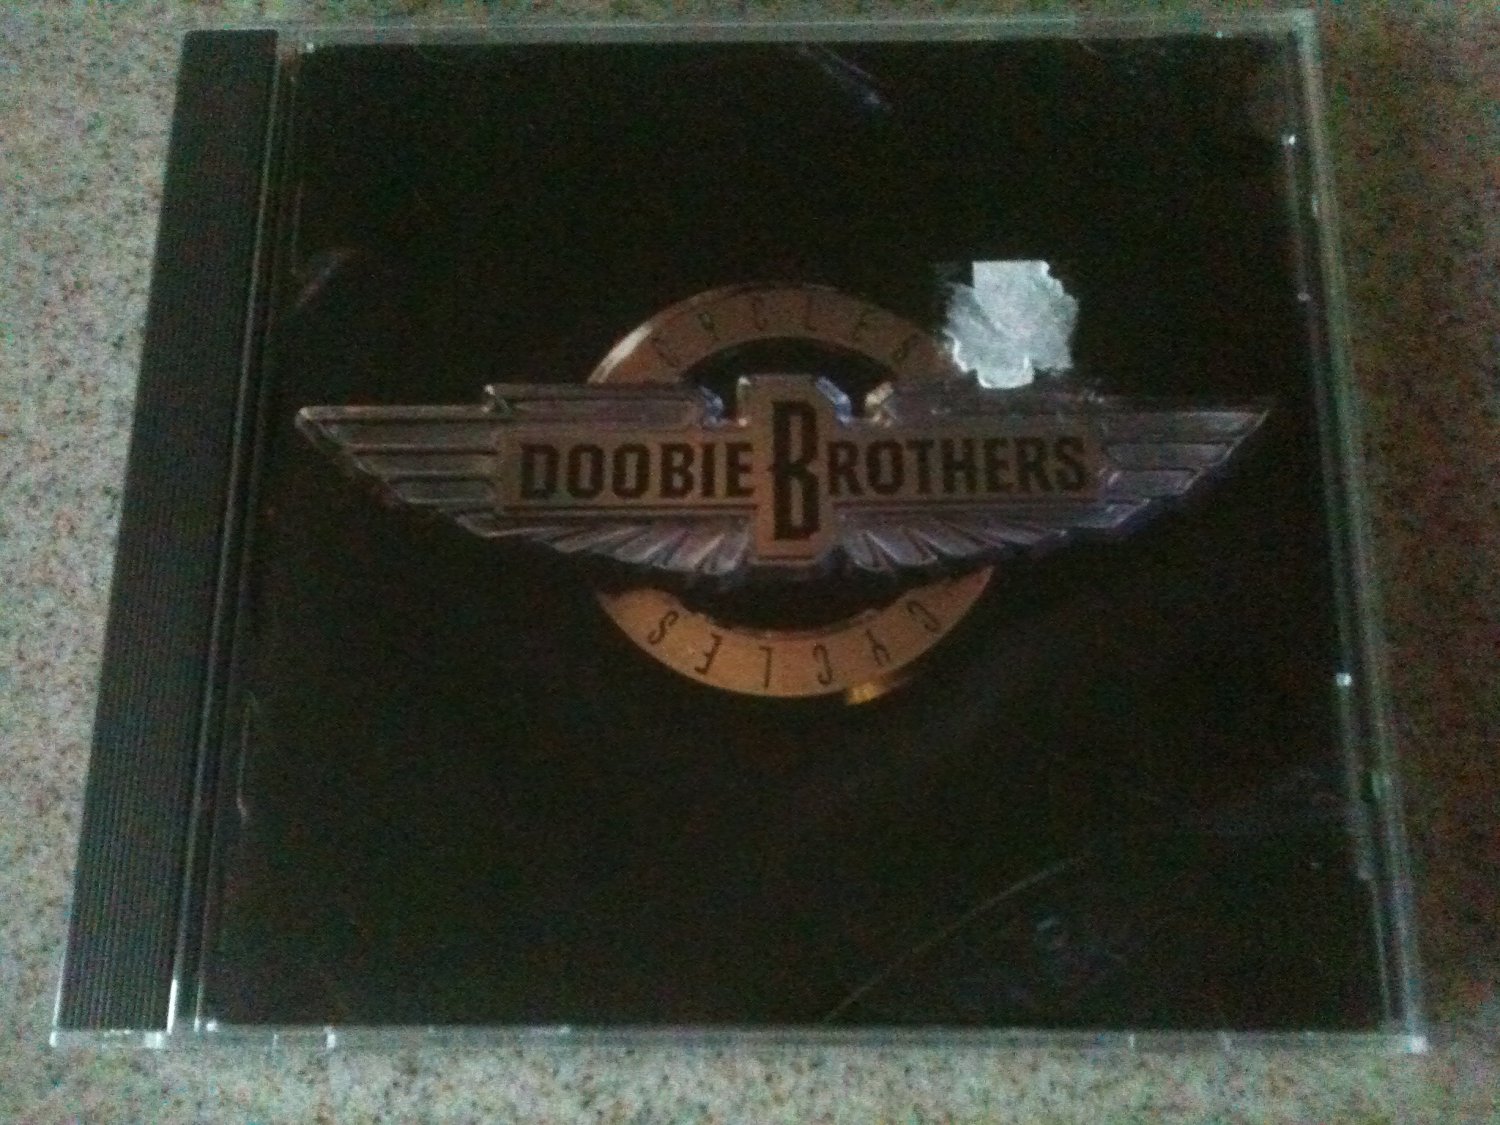 The Doobie Brothers - Cycles (CD, Oct-1990, Capitol) LIKE NEW disc